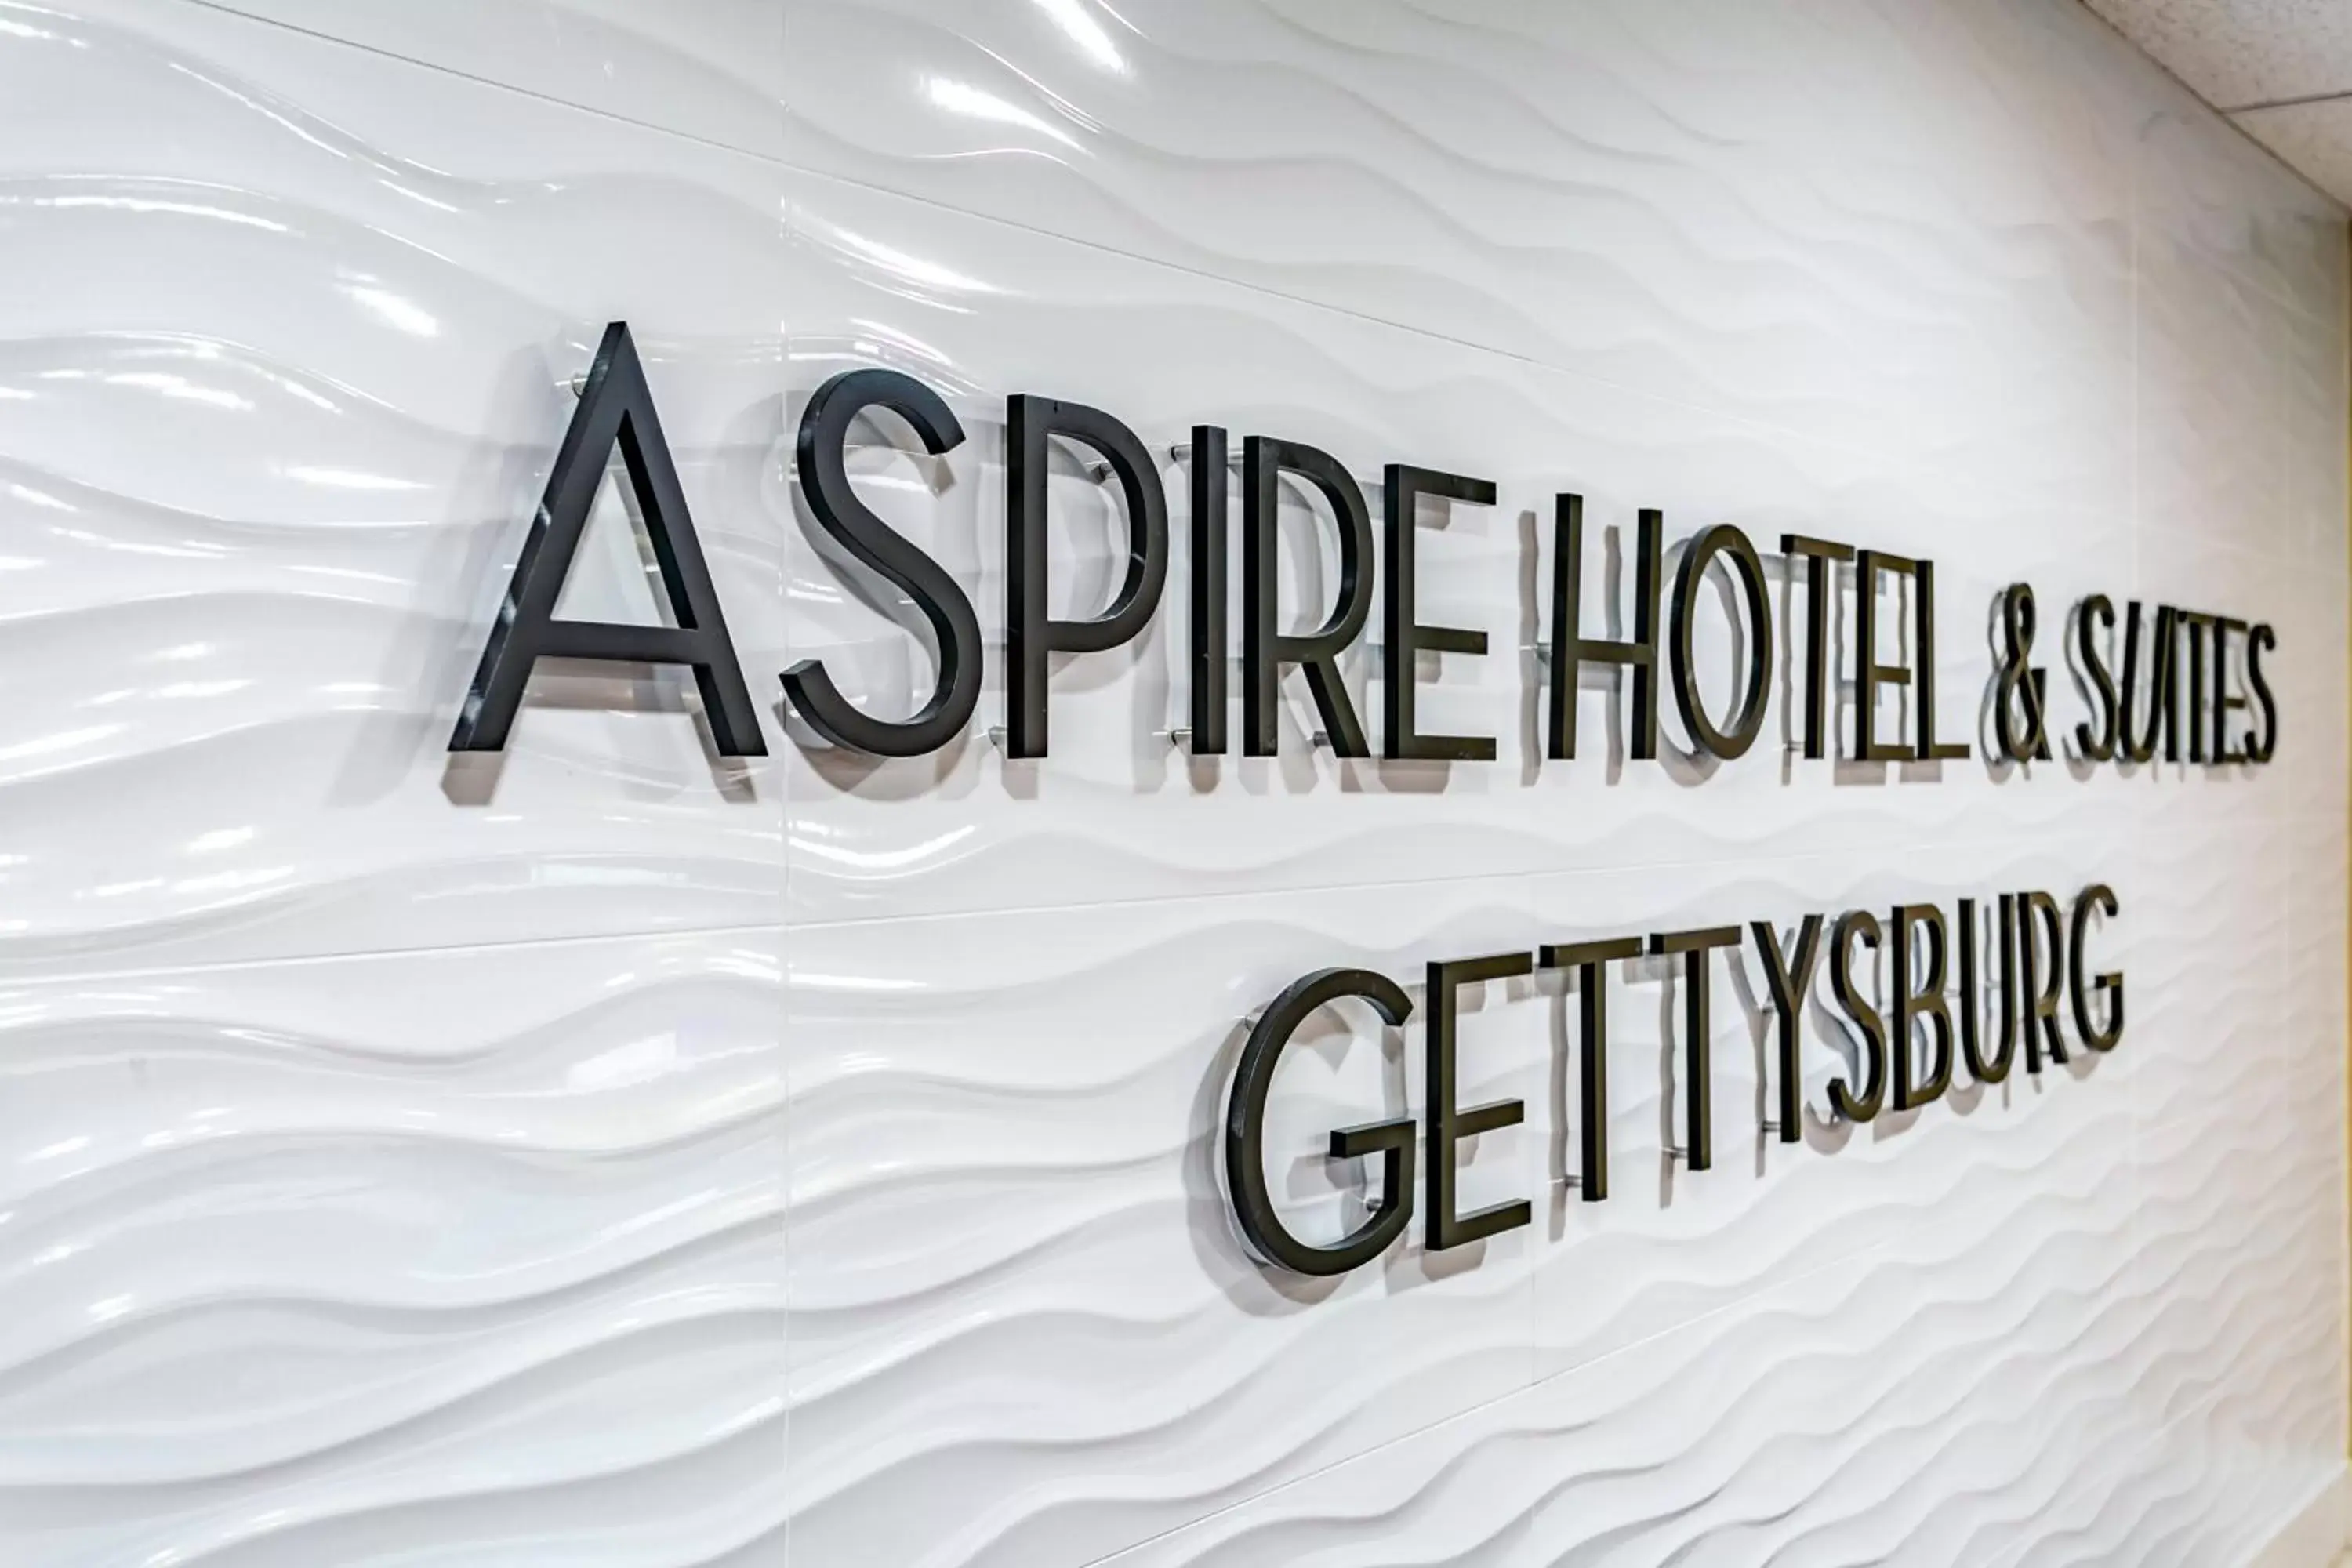 Logo/Certificate/Sign in Aspire Hotel and Suites